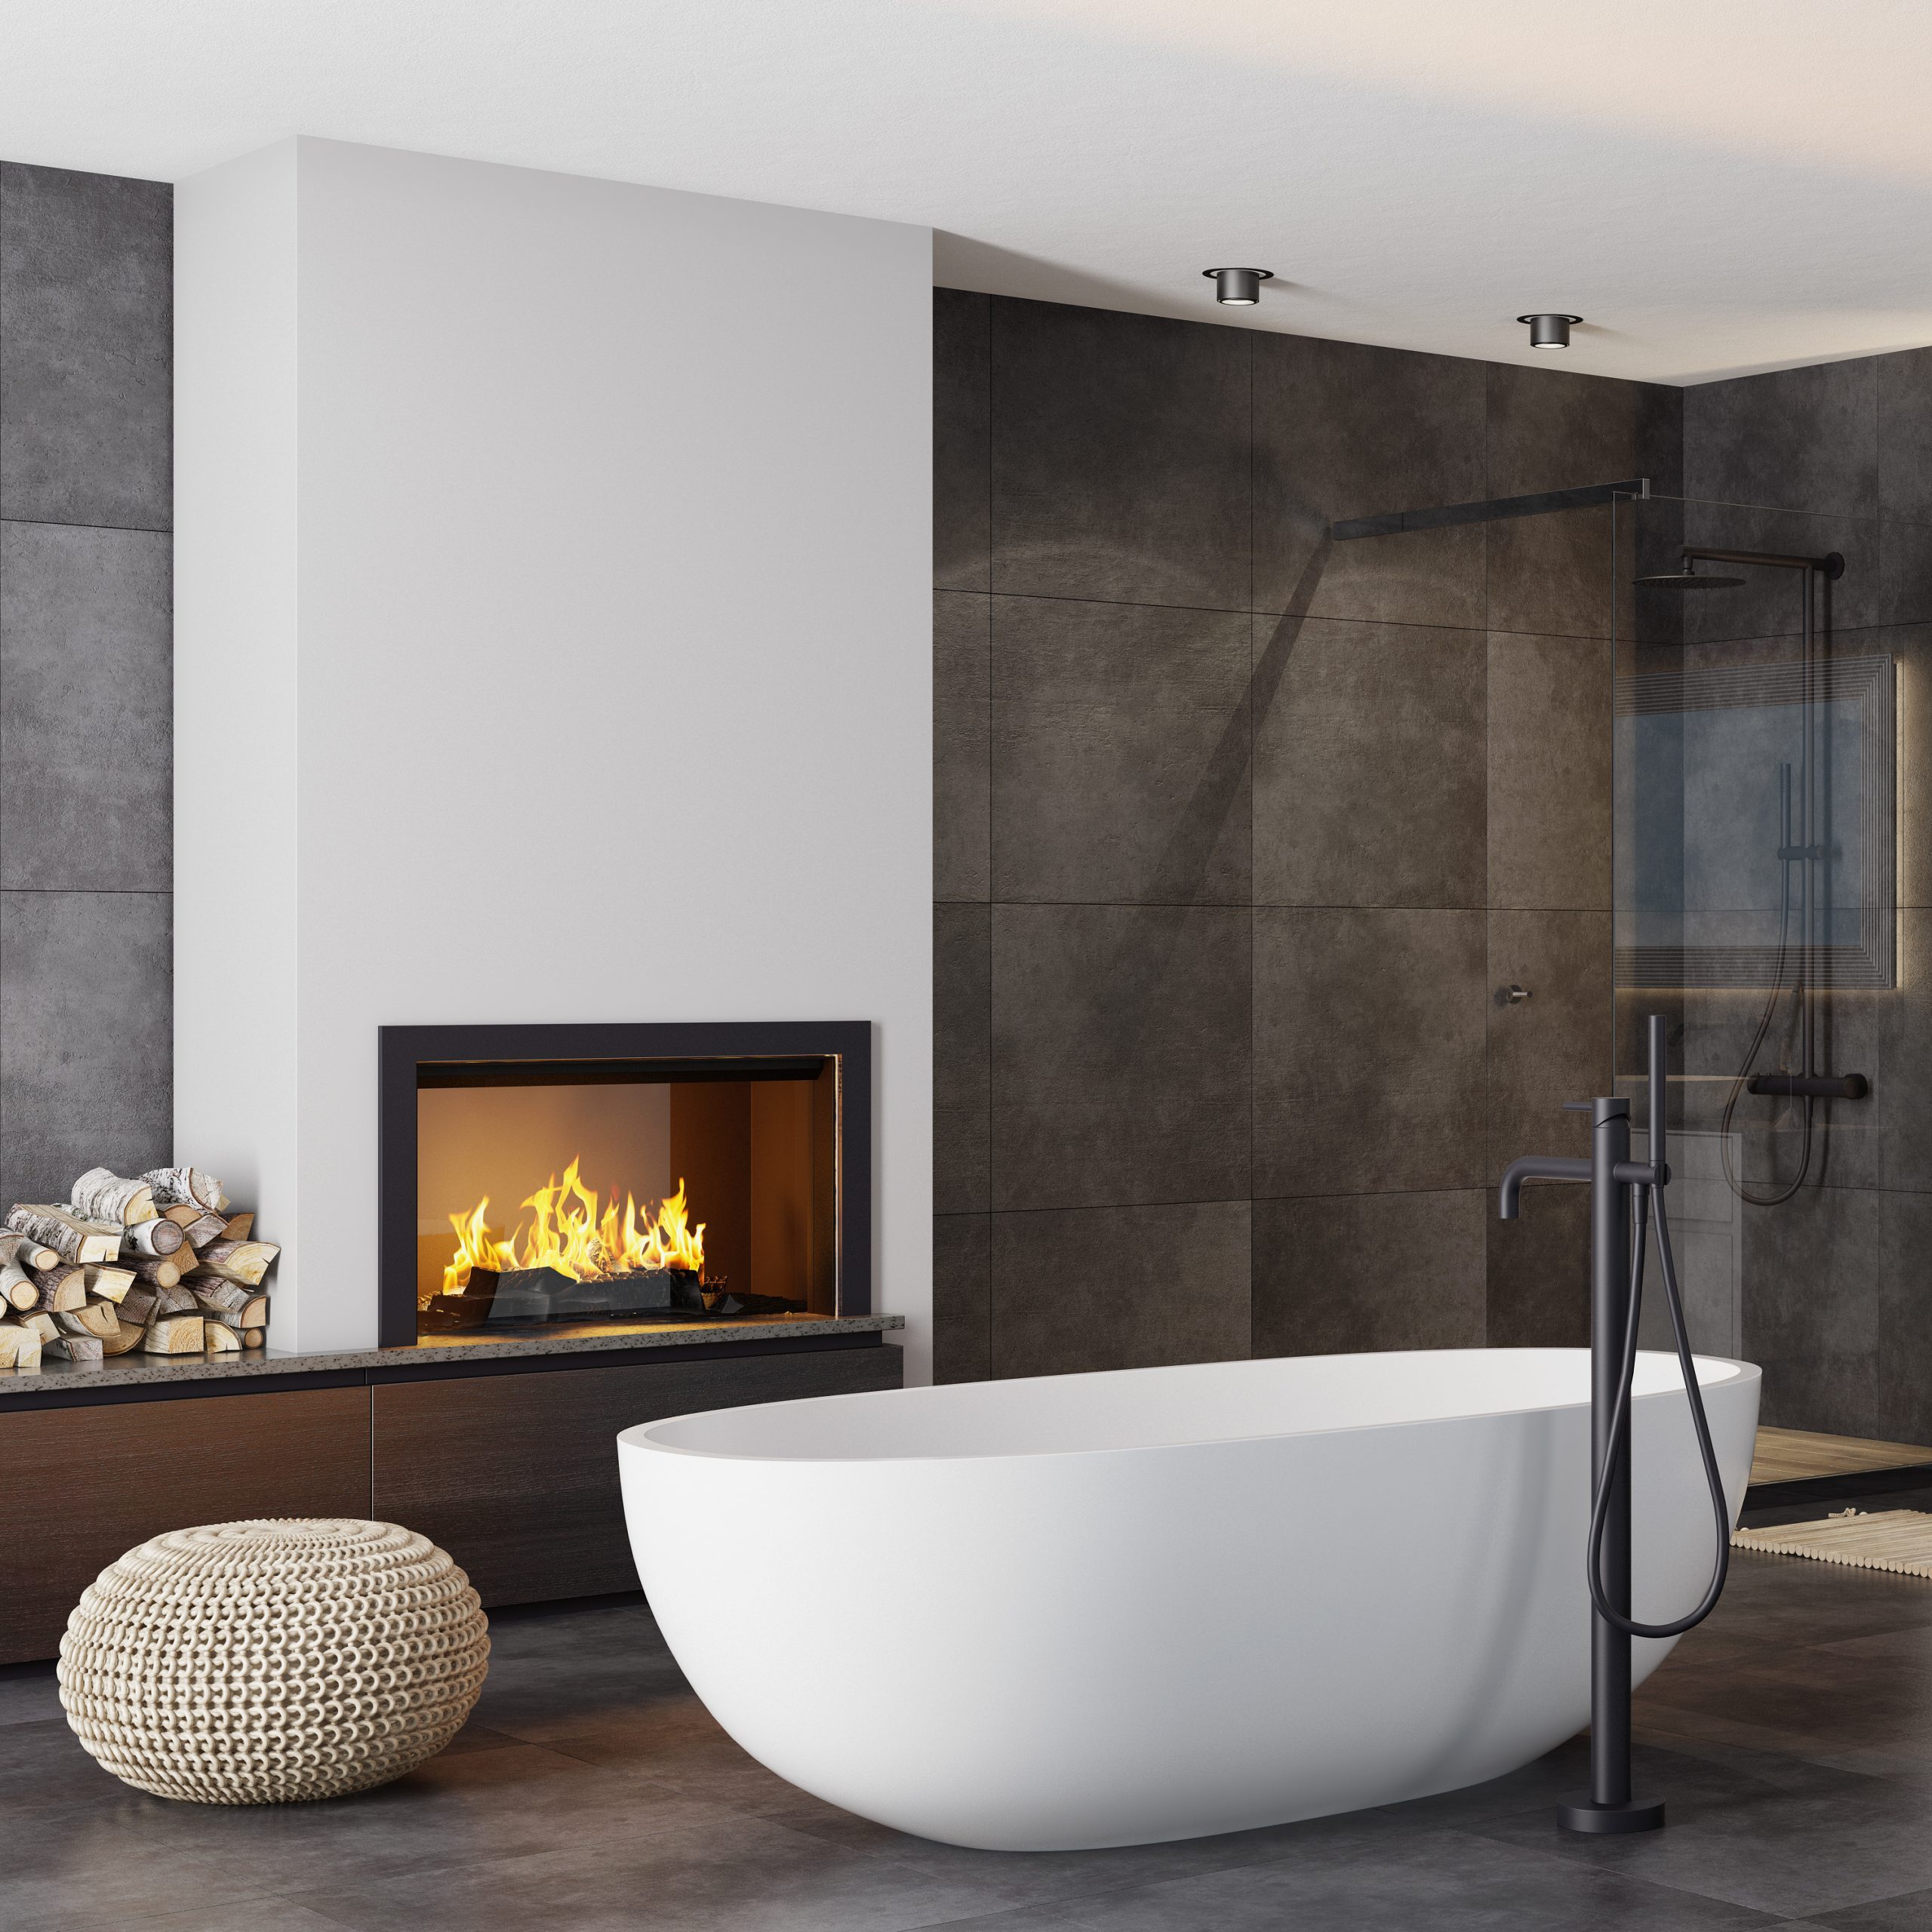 Bathroom Fireplaces: What You Need To Know